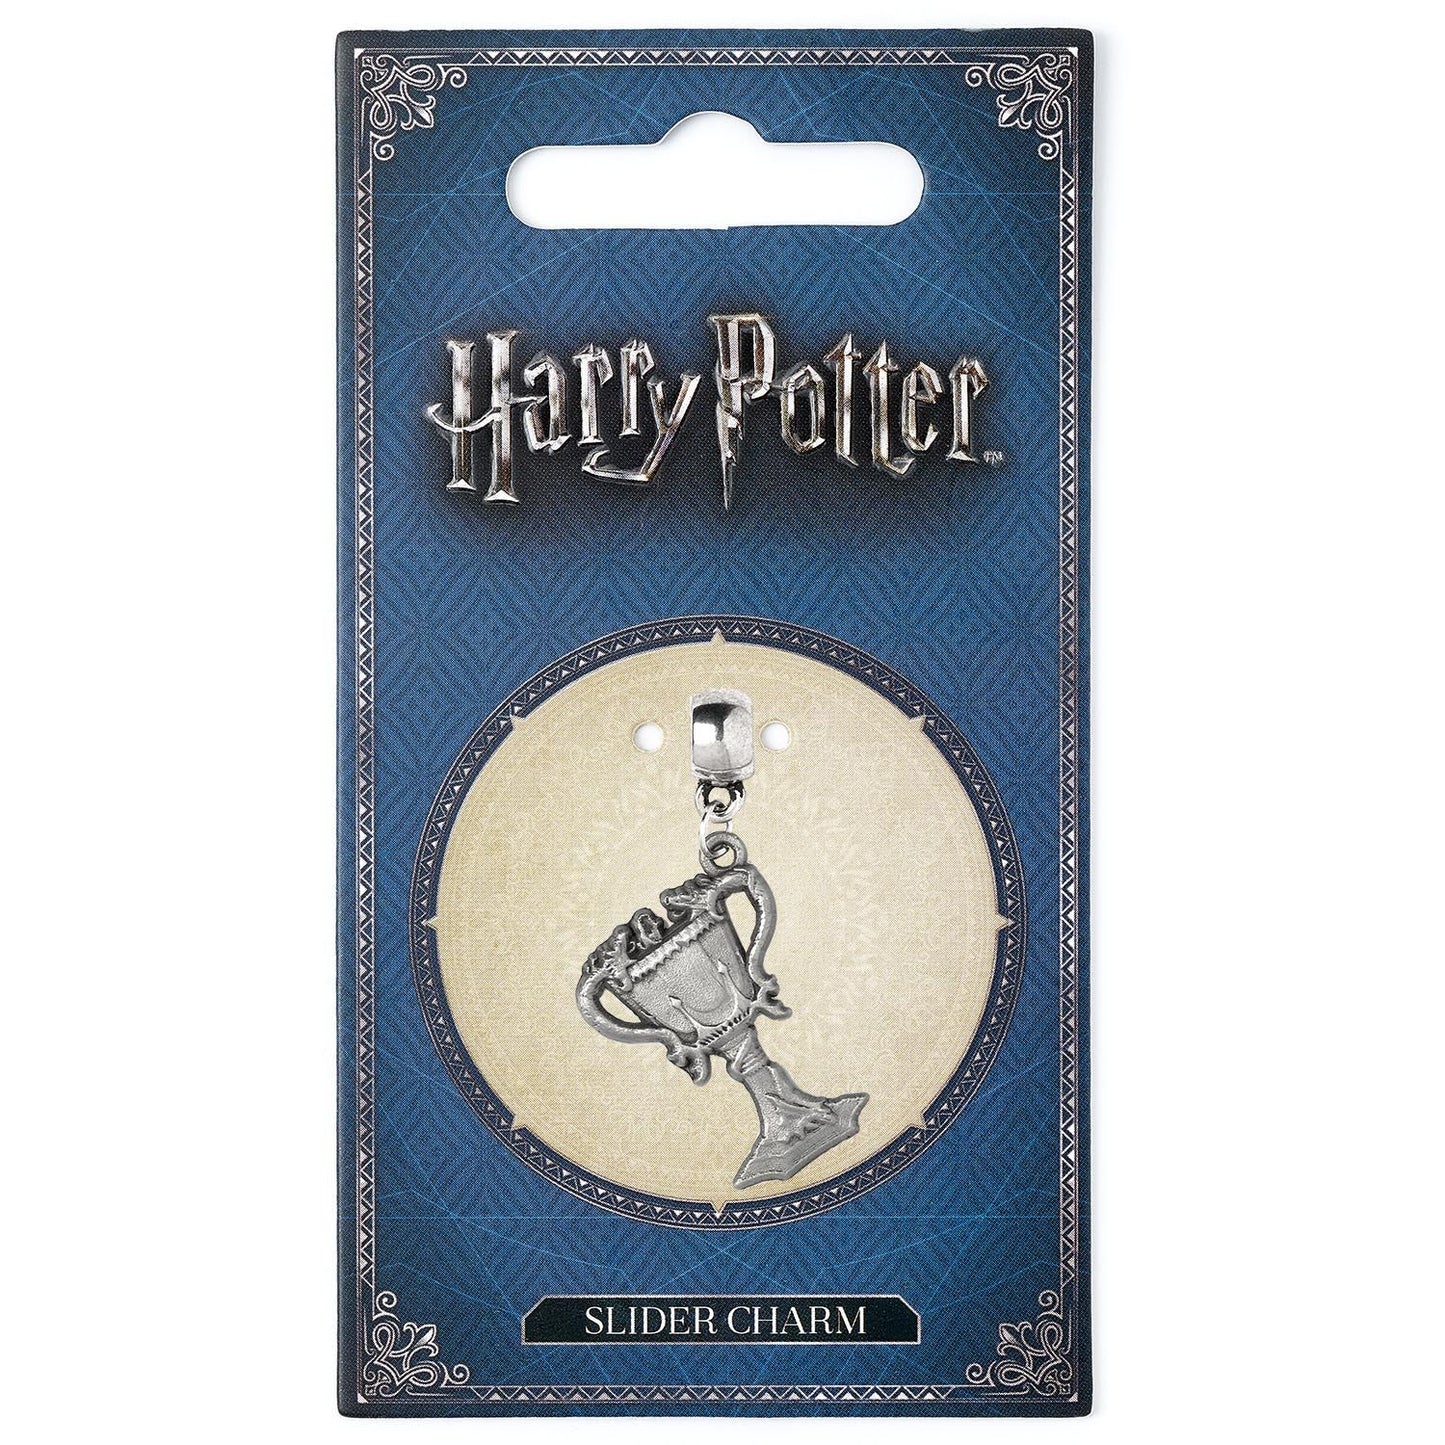 HARRY POTTER TRI WIZARD CUP CHARM.